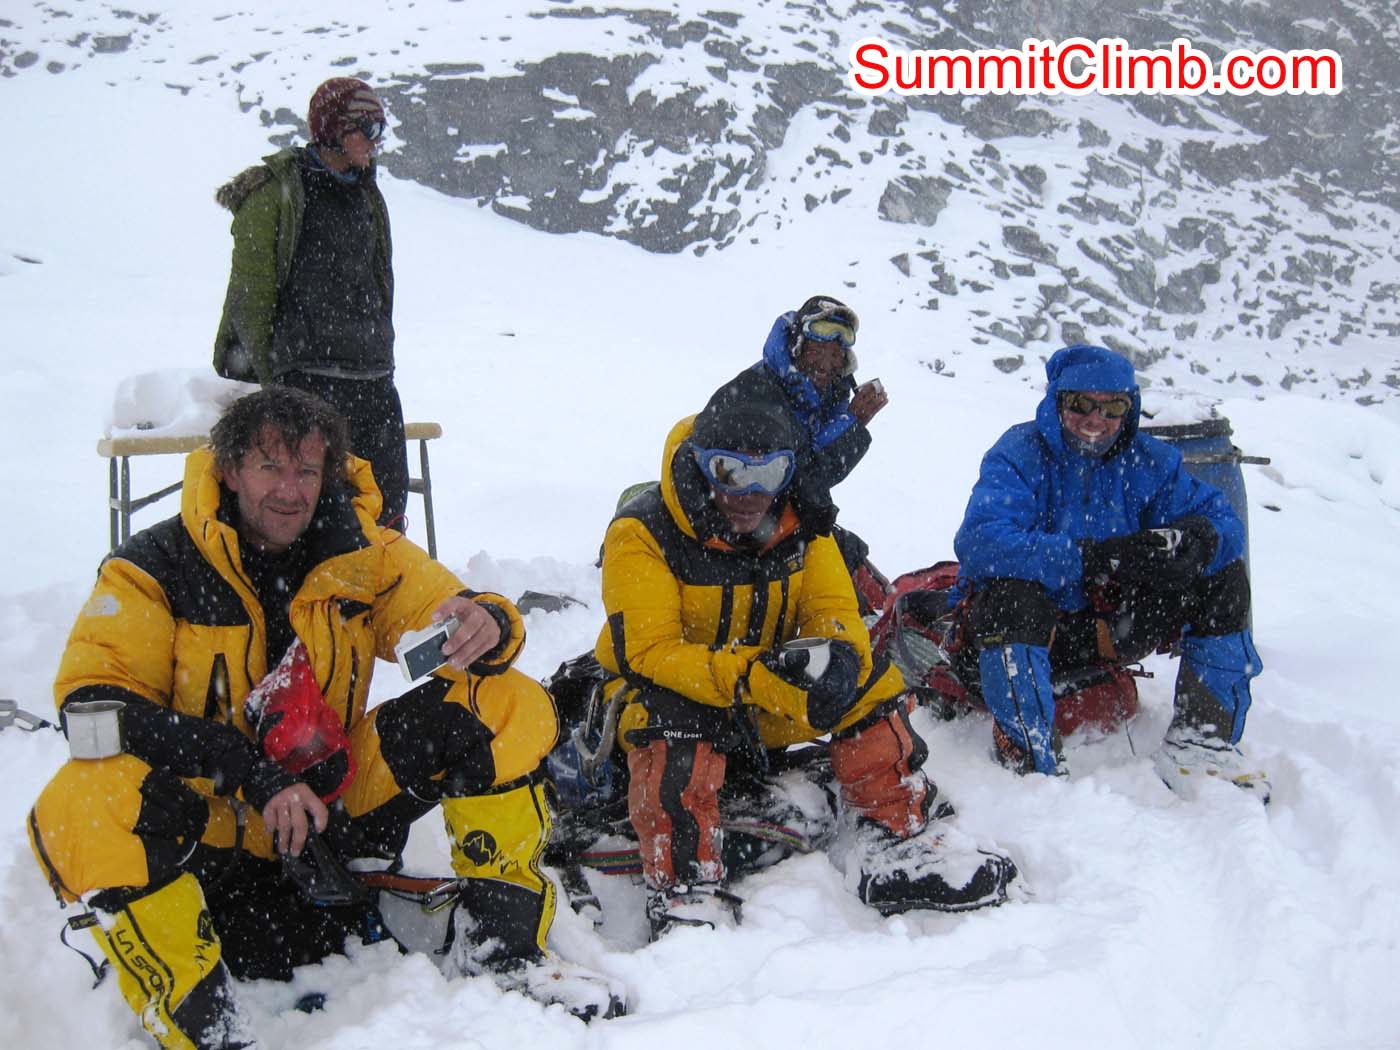 Sherpas and climbers at crampon point after descending North Col from Summit - Photo mia Graeffe